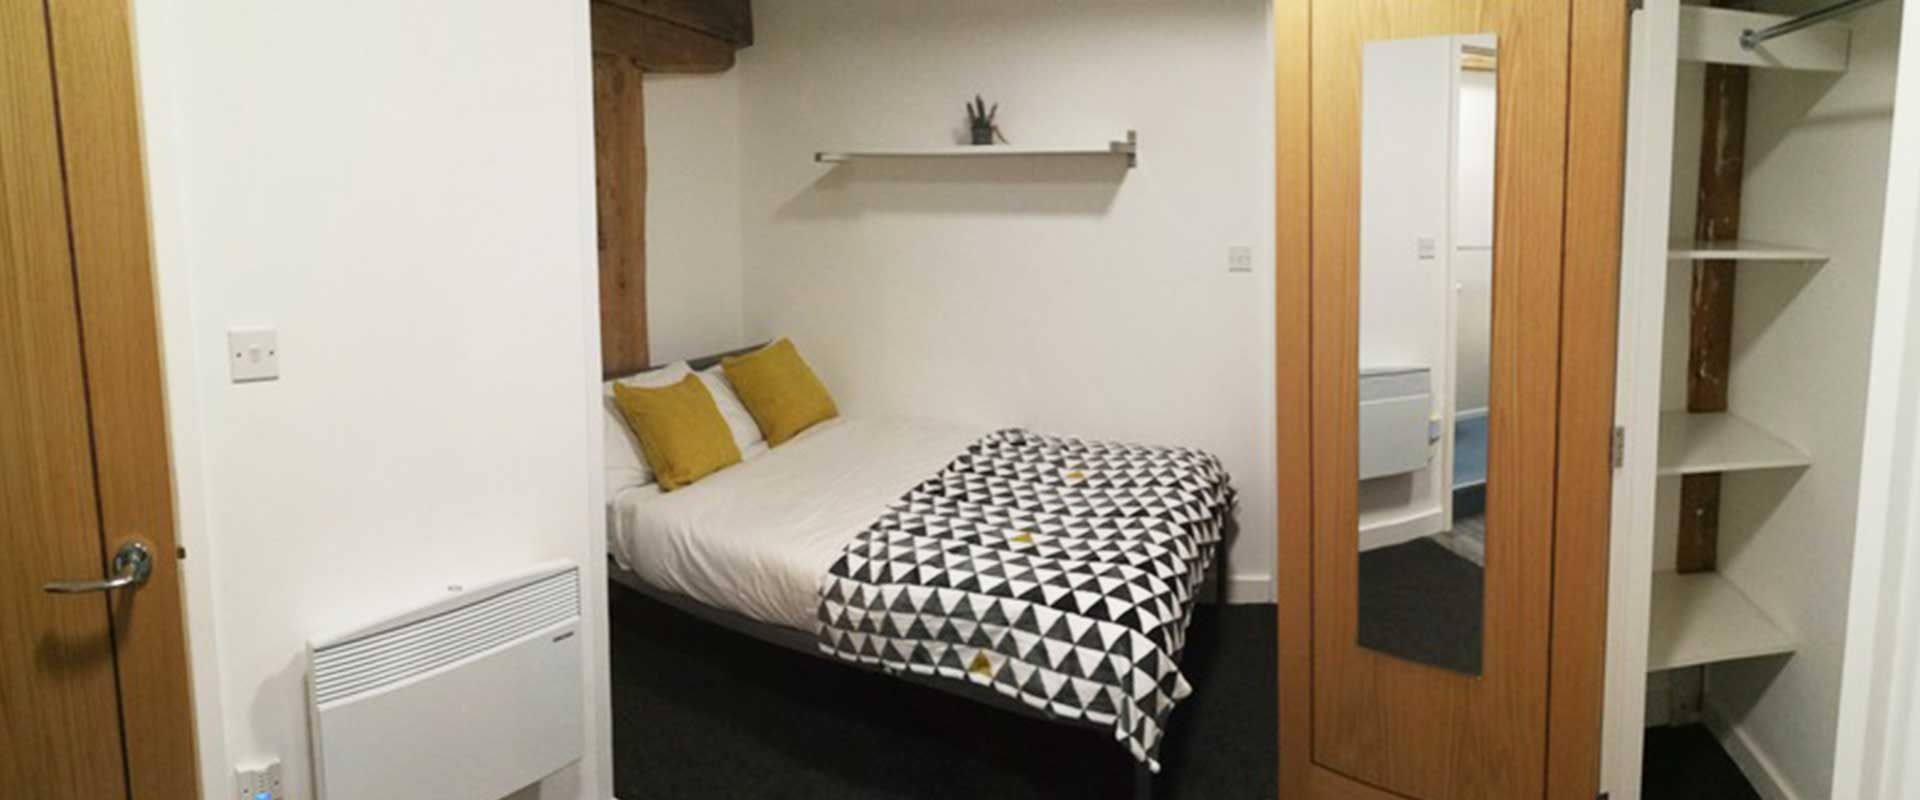 Forest Rise Loughborough Accommodation - Modern living spaces to cater for everyone's needs